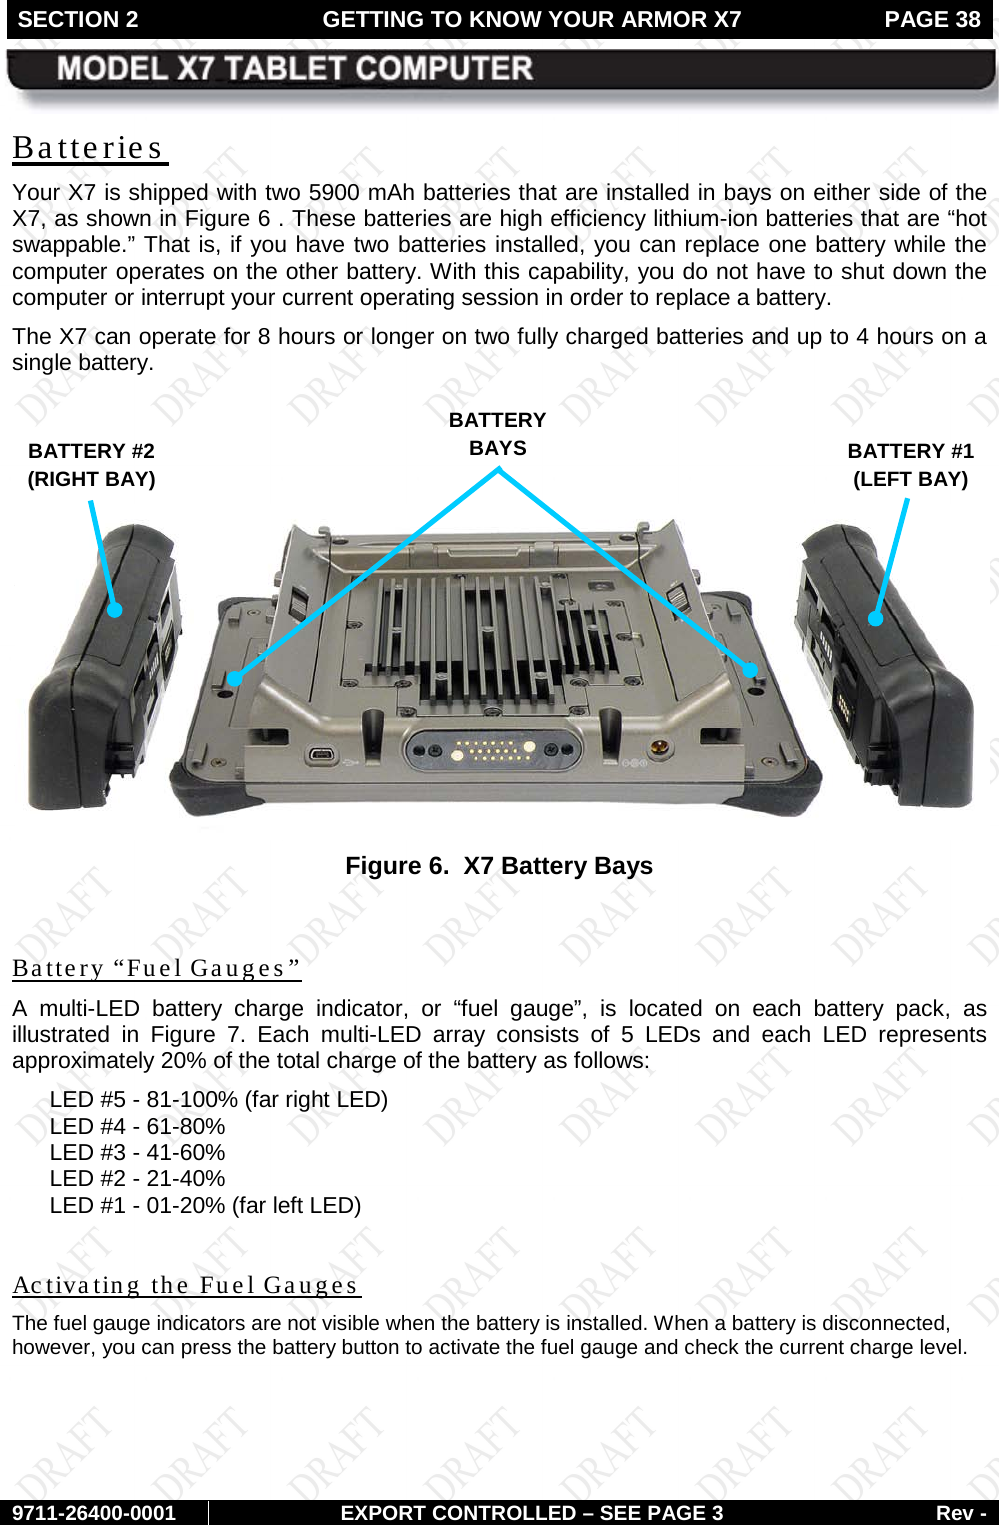 SECTION 2 GETTING TO KNOW YOUR ARMOR X7  PAGE 38        9711-26400-0001 EXPORT CONTROLLED – SEE PAGE 3 Rev - Batteries Your X7 is shipped with two 5900 mAh batteries that are installed in bays on either side of the X7, as shown in Figure 6 . These batteries are high efficiency lithium-ion batteries that are “hot swappable.” That is, if you have two batteries installed, you can replace one battery while the computer operates on the other battery. With this capability, you do not have to shut down the computer or interrupt your current operating session in order to replace a battery.  The X7 can operate for 8 hours or longer on two fully charged batteries and up to 4 hours on a single battery.     Figure 6.  X7 Battery Bays  Battery “Fuel Gauges”   A  multi-LED  battery charge indicator, or “fuel gauge”, is located on each battery pack, as illustrated in  Figure  7. Each multi-LED  array consists of 5 LEDs and each LED represents approximately 20% of the total charge of the battery as follows: LED #5 - 81-100% (far right LED) LED #4 - 61-80% LED #3 - 41-60% LED #2 - 21-40% LED #1 - 01-20% (far left LED)  Activating the Fuel Gauges The fuel gauge indicators are not visible when the battery is installed. When a battery is disconnected, however, you can press the battery button to activate the fuel gauge and check the current charge level.  BATTERY #1 (LEFT BAY) BATTERY BAYS BATTERY #2 (RIGHT BAY) 